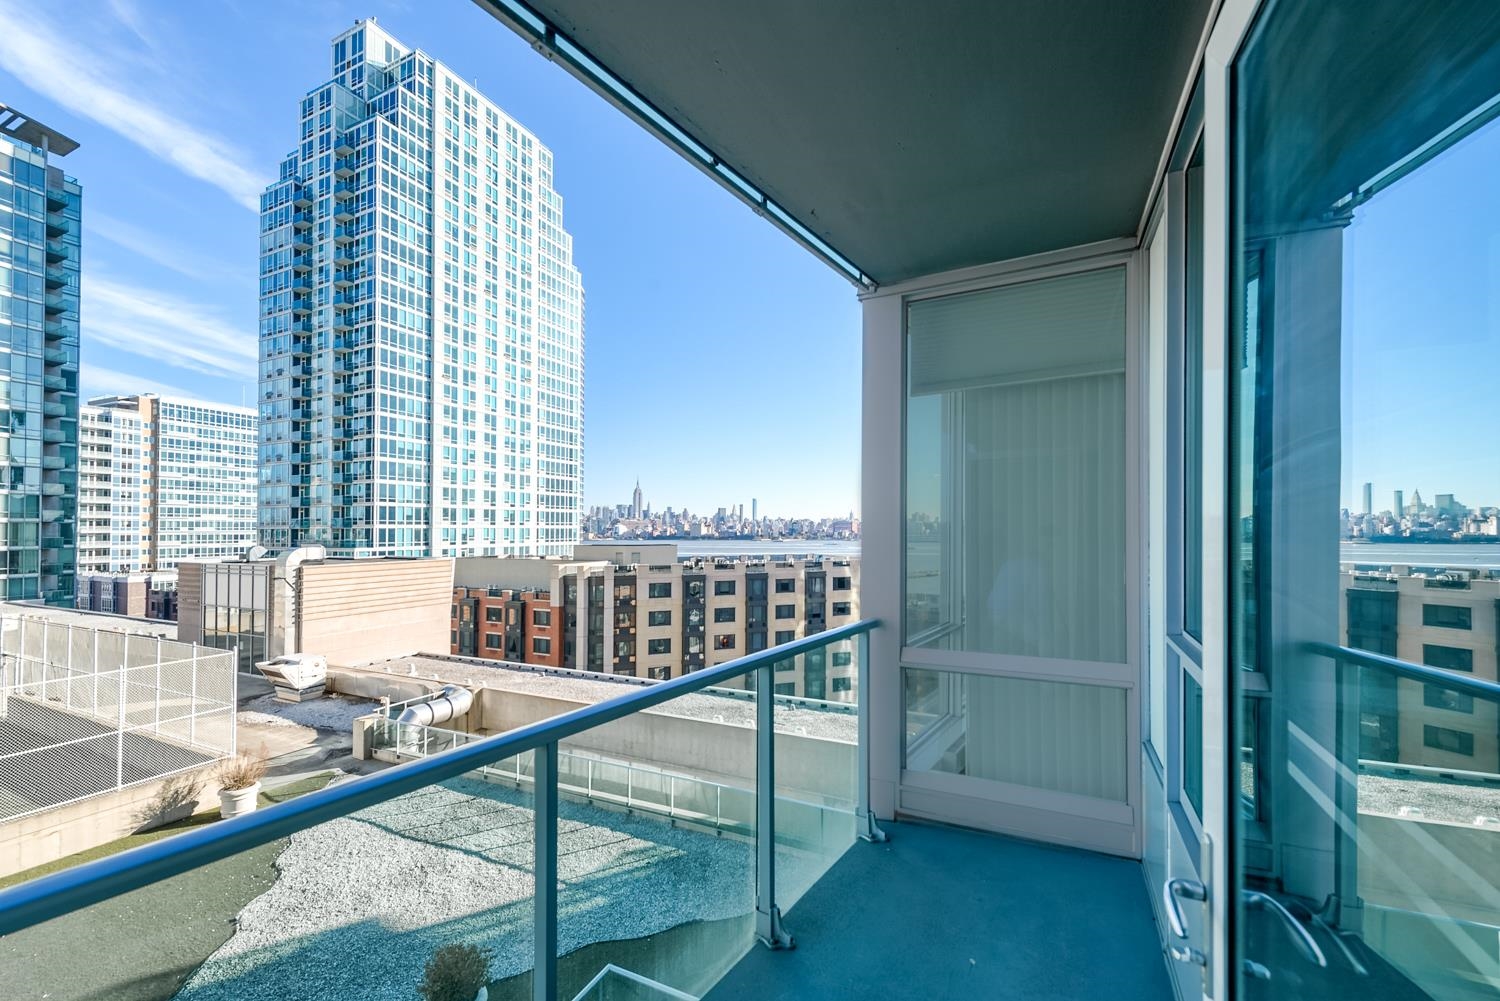 # 240008479 - For Rent in JERSEY CITY - Downtown NJ